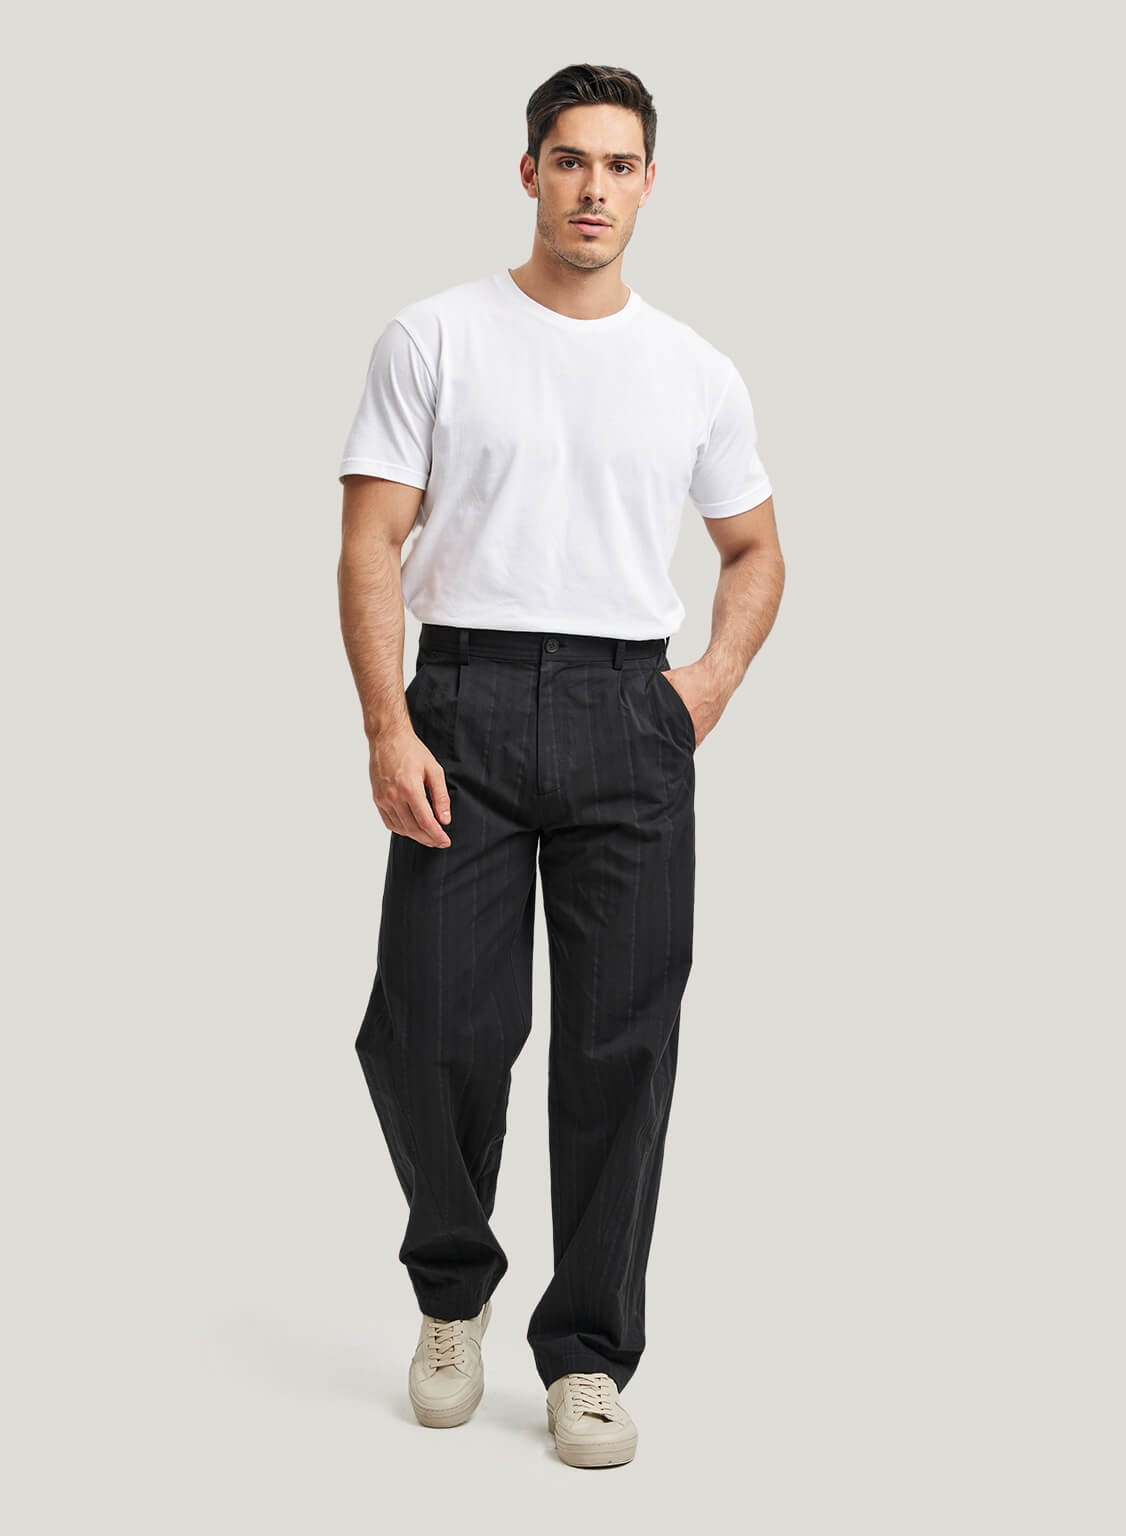 Sand Pleated Vigo Pants in Pure Cotton | SUITSUPPLY US